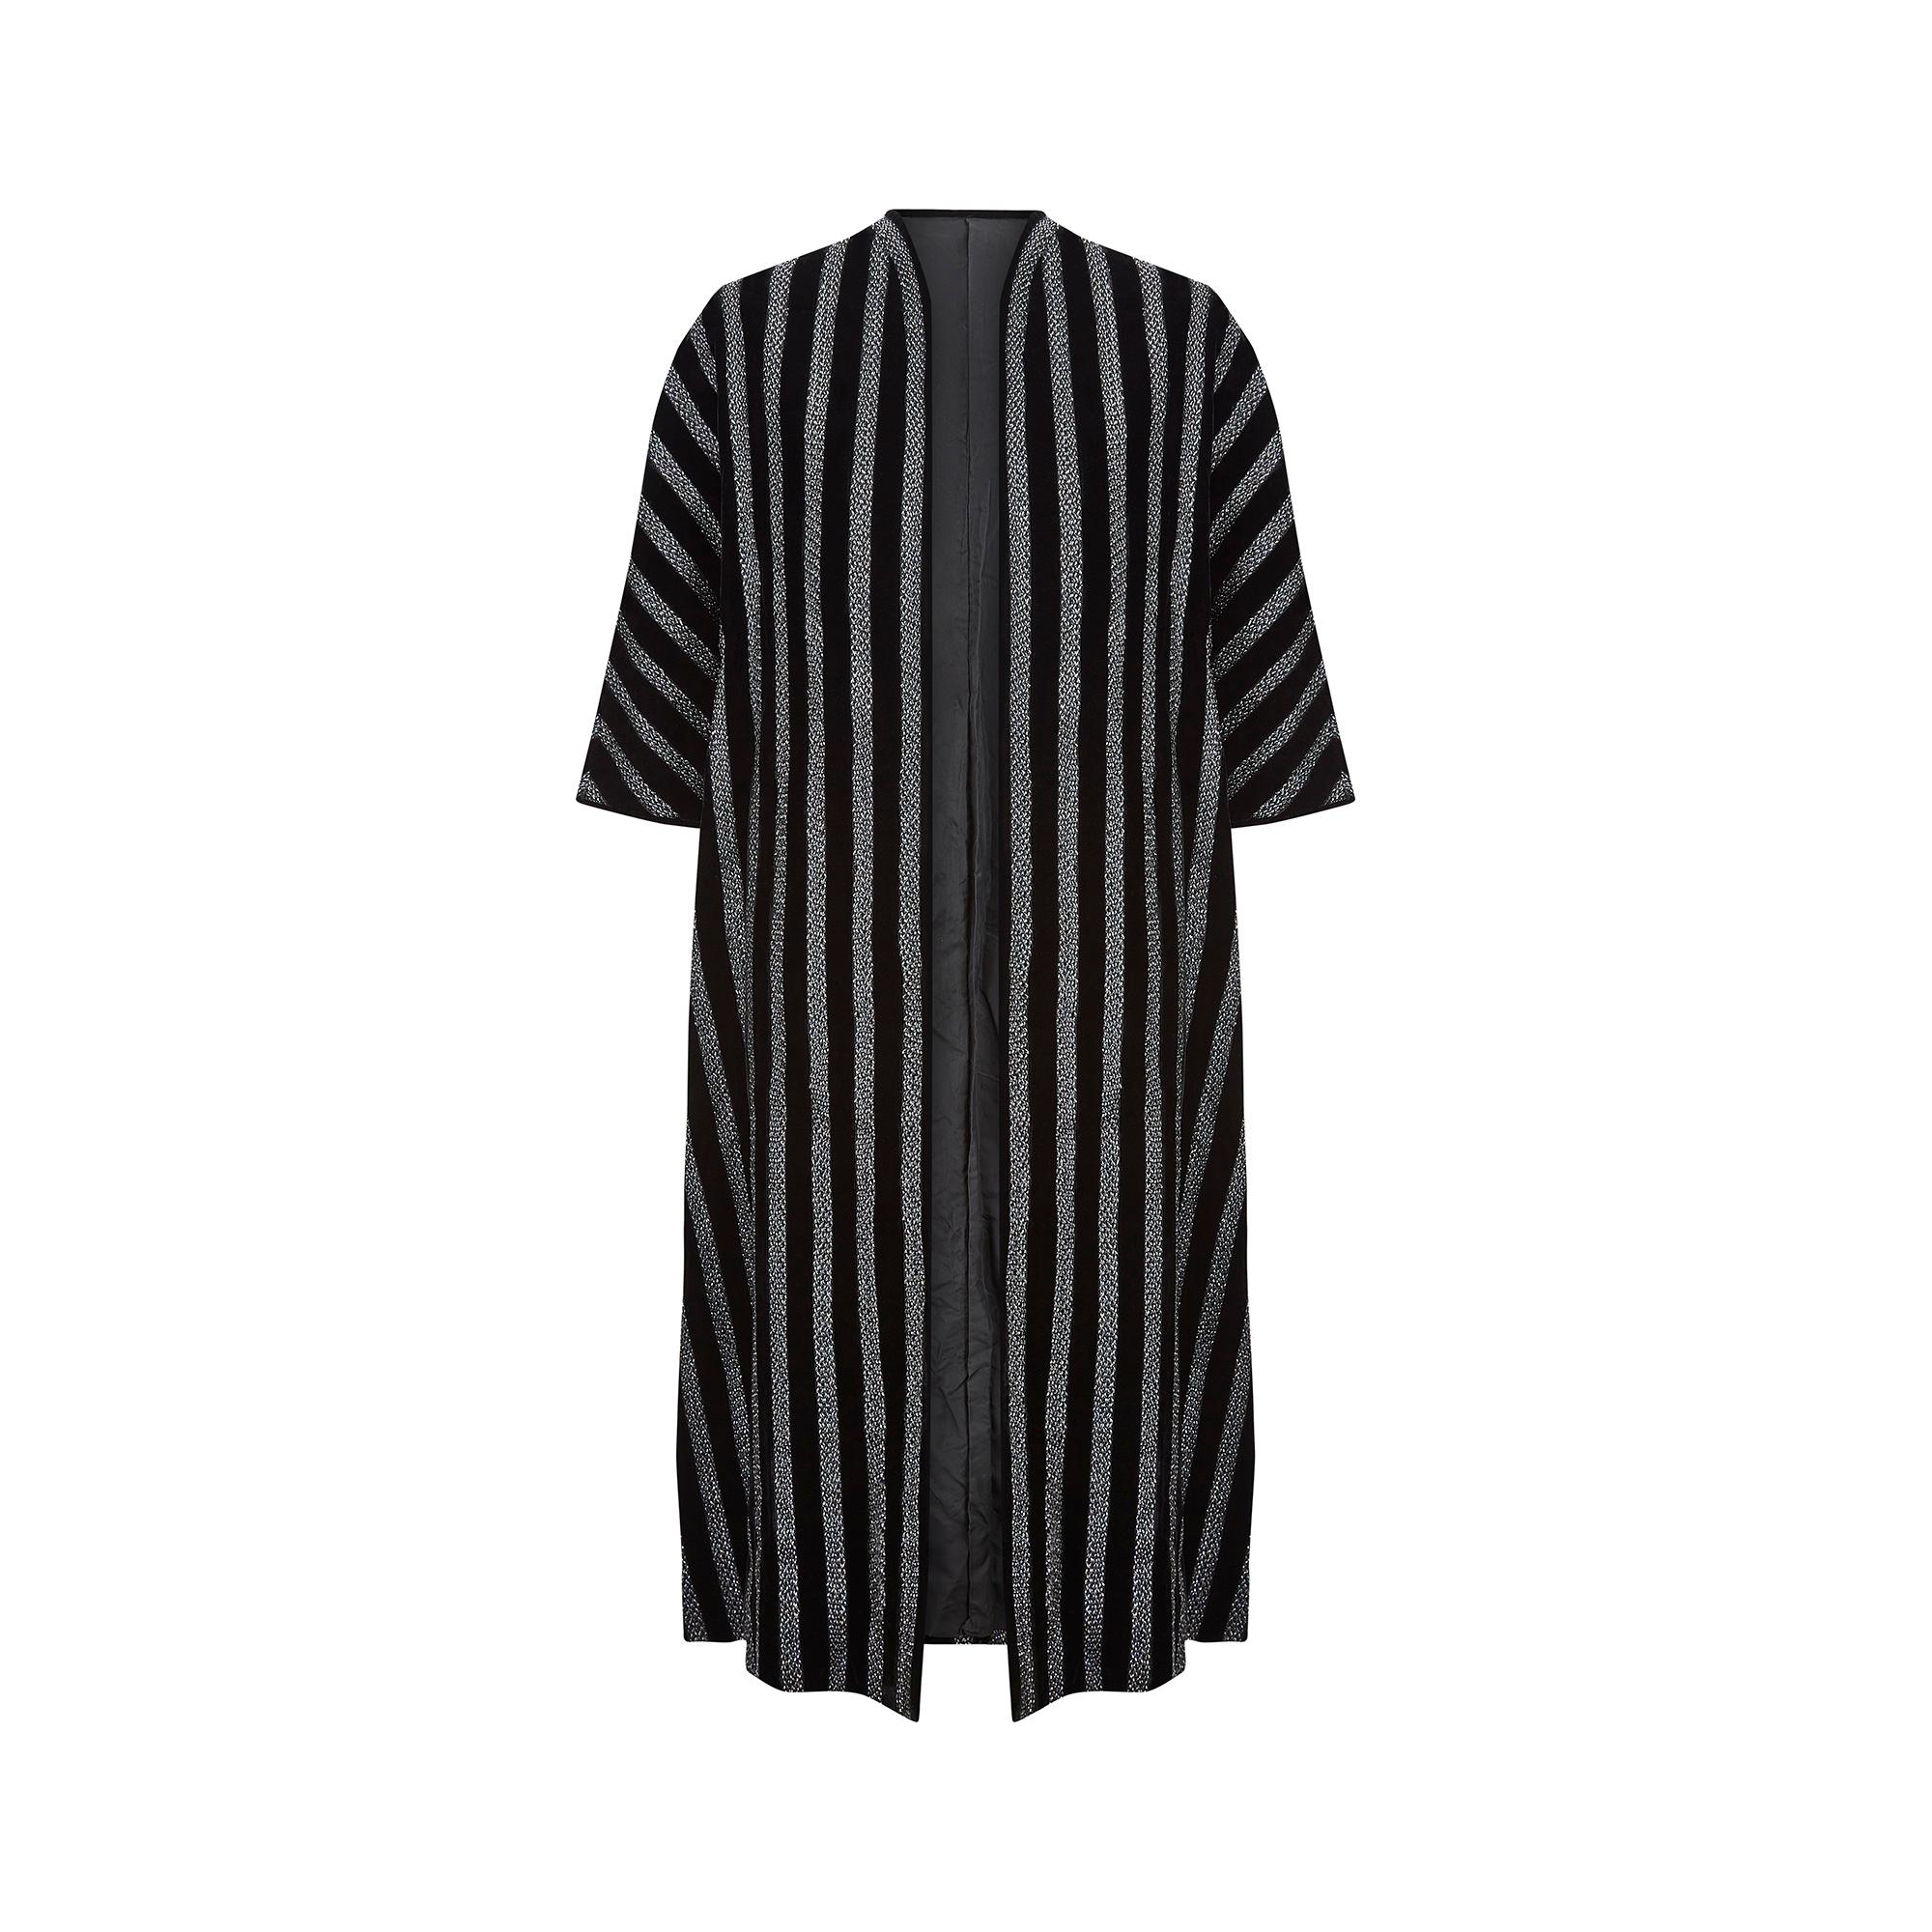 A show-stopper of a jacket, this late 1960s to early 1970s duster coat is the perfect throw-on finish to your party look. A substantial, weighty piece of tailoring, it has been created from thick 100% cotton black velvet woven with stripes of